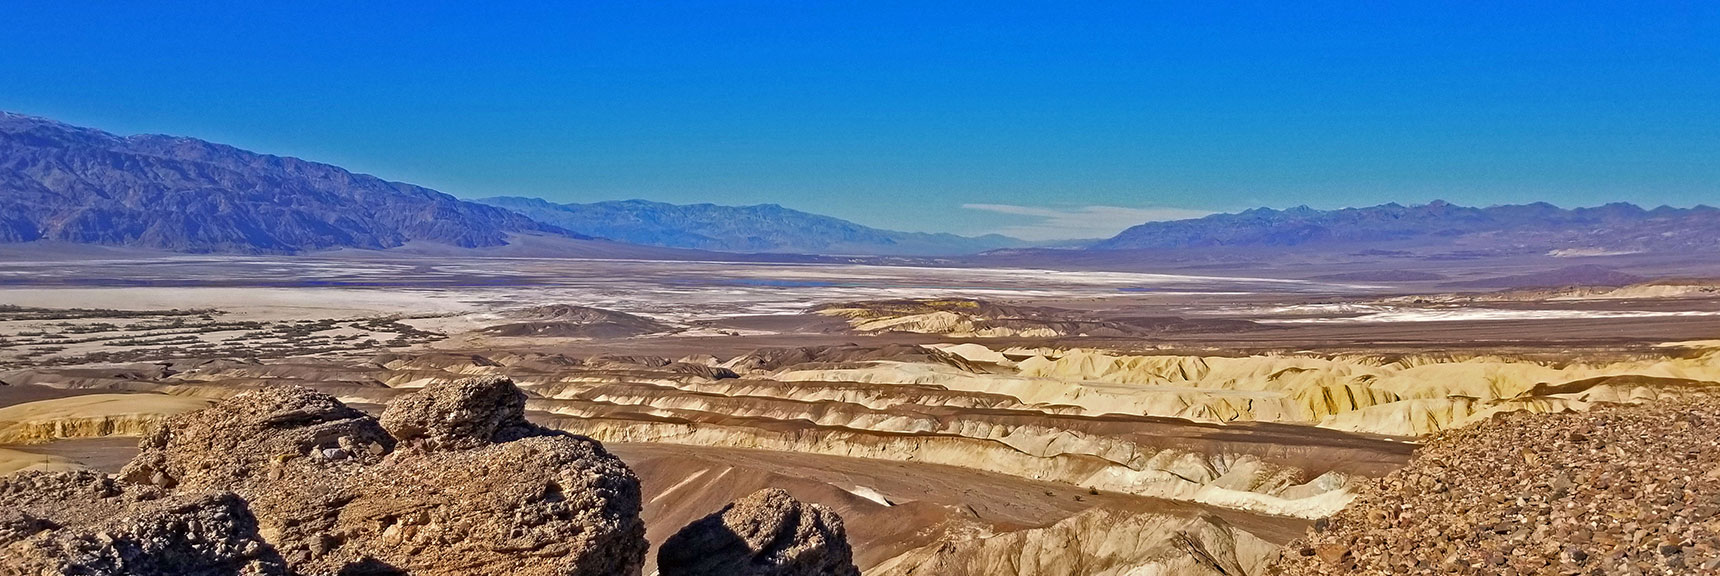 Northern Death Valley from Table Rock Summit. | Tea House & Table Rock Circuit | Furnace Creek | Death Valley National Park, California